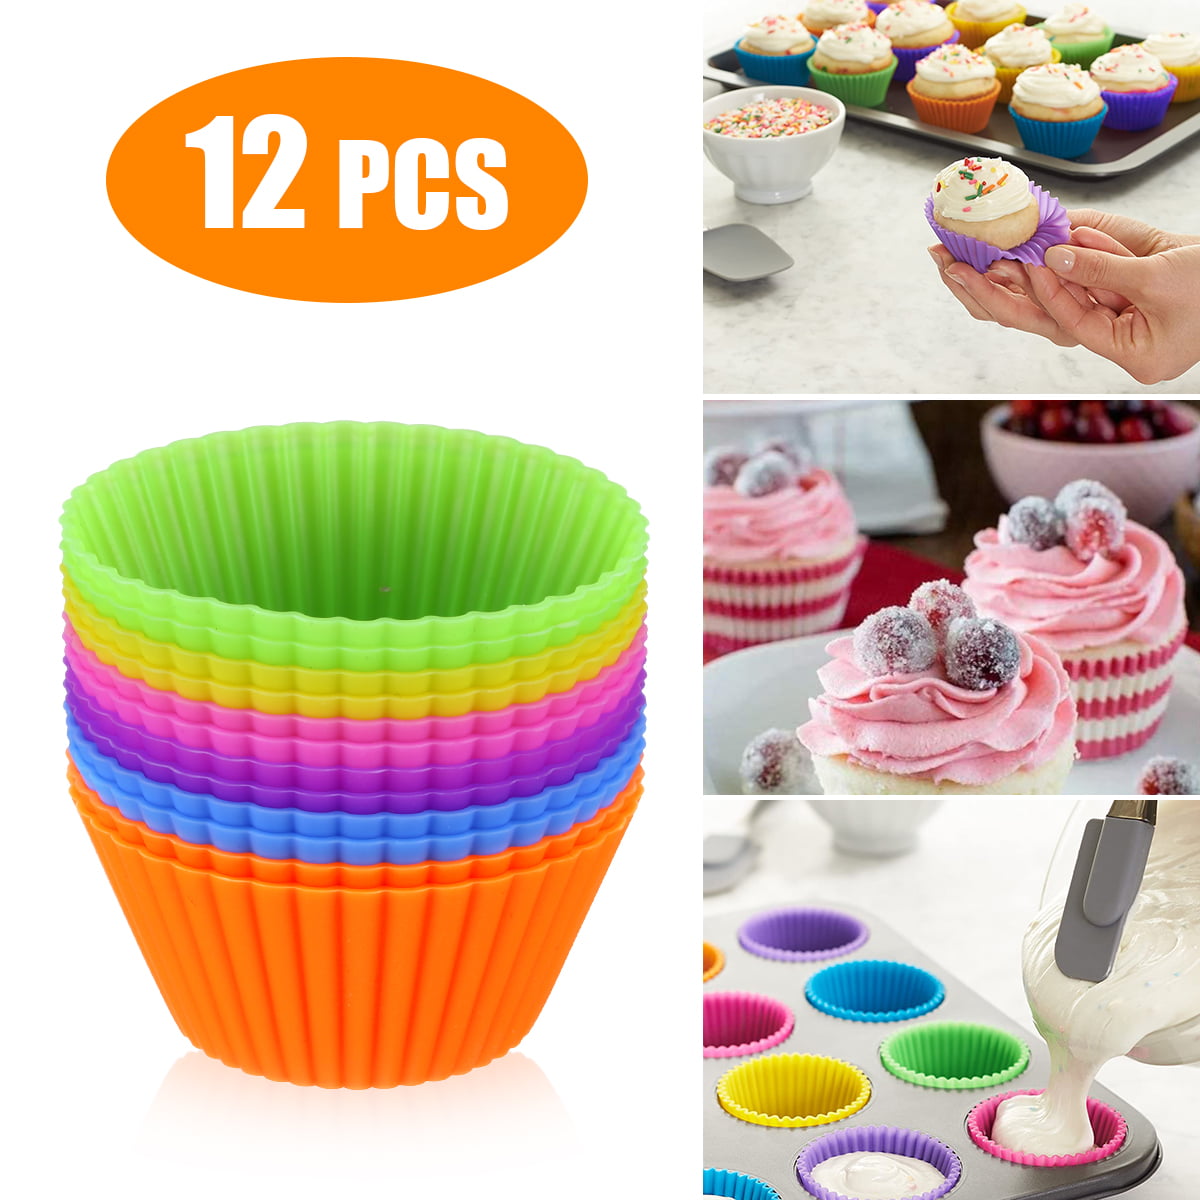 12/24pcs Silicone Cake Muffin Chocolate Cupcake Liner Baking Cup Cookie Molds